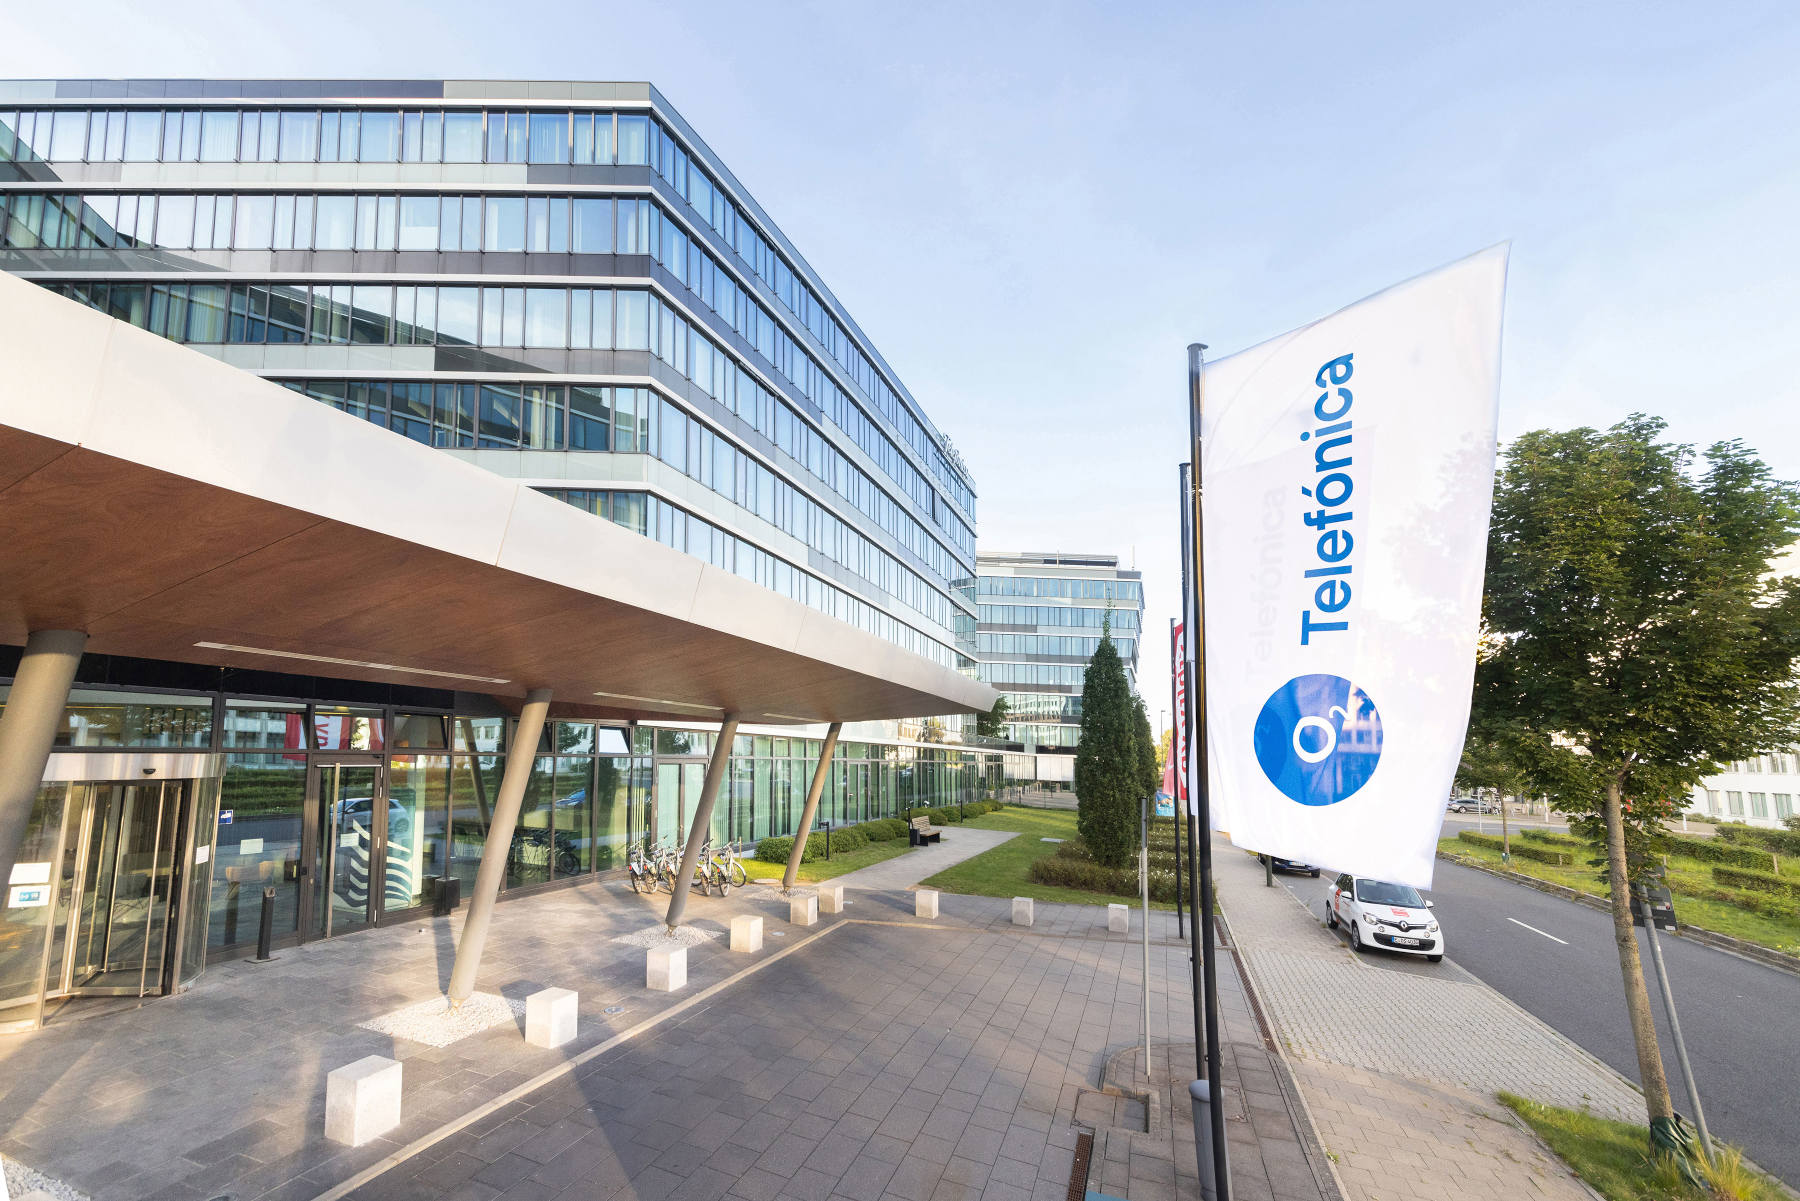 Office building of Telefonica o2 in Duesseldorf.